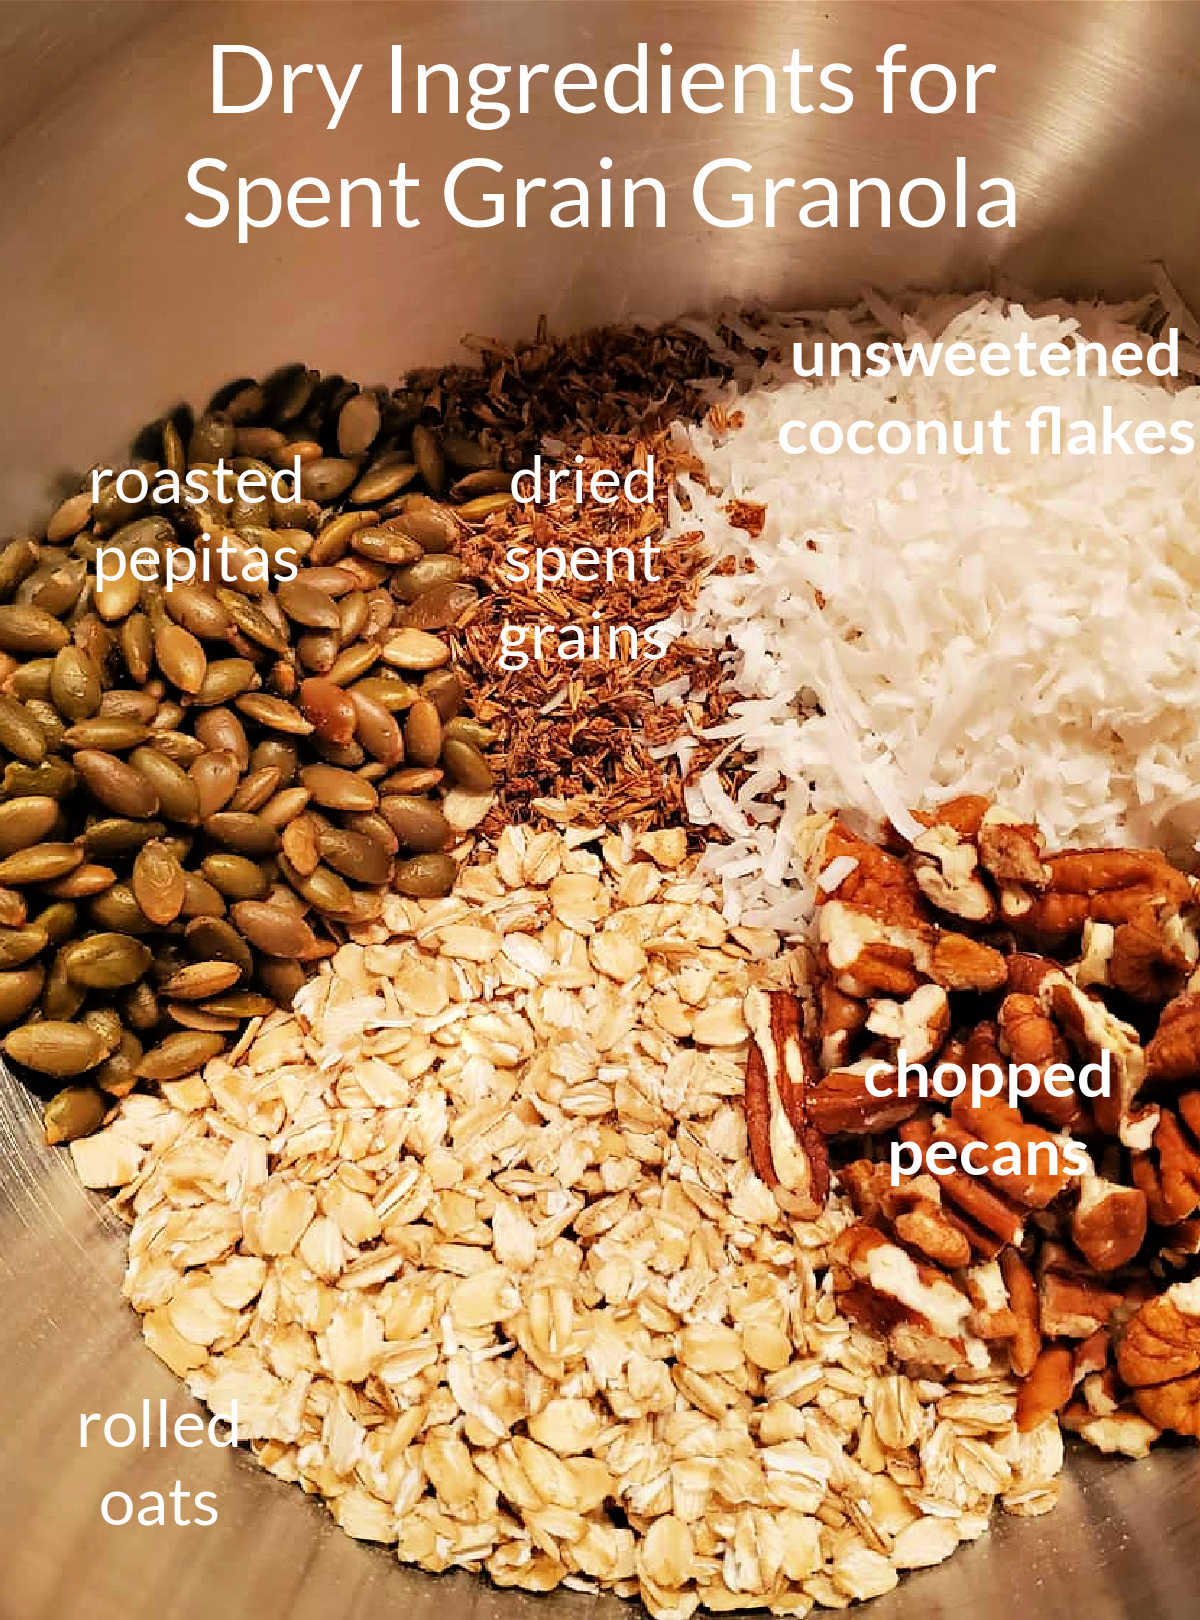 An overhead shot of the ingredients for spent grain granola with all the ingredients labeled: pepitas, spent grains, coconut, oatmeal, and pecans.